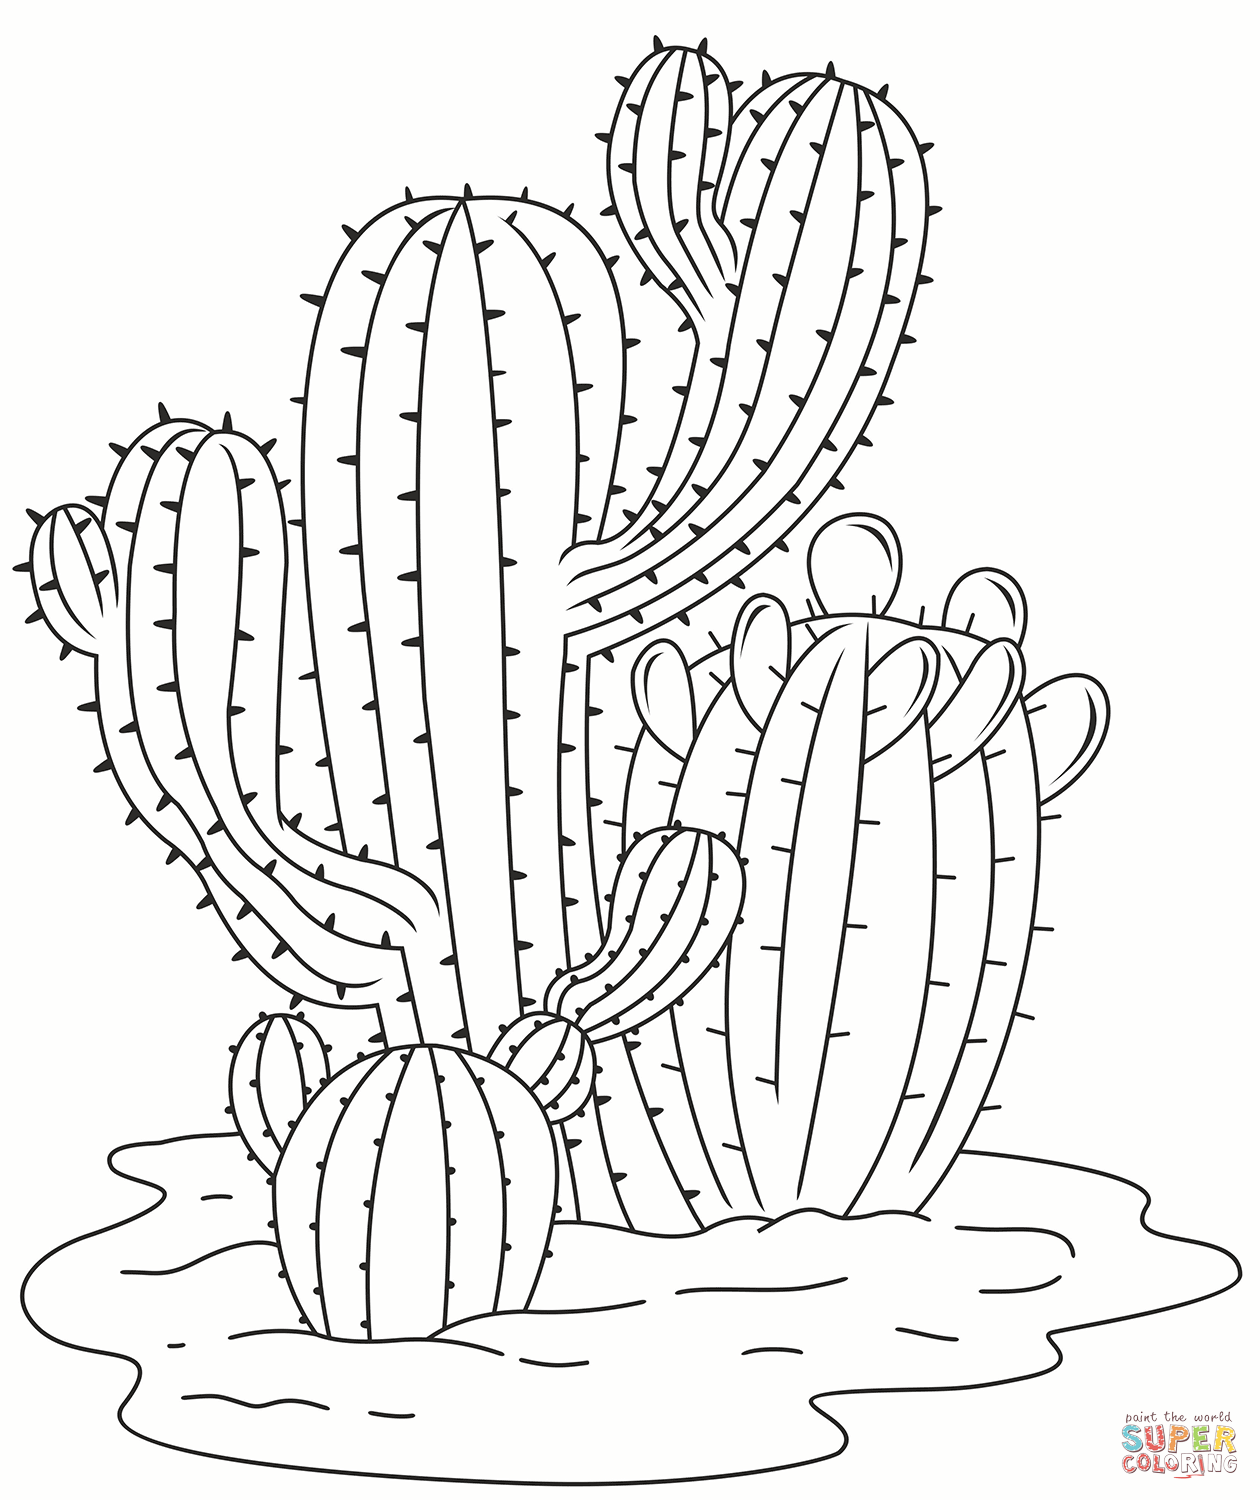 Cactus coloring page | Free Printable Coloring Pages